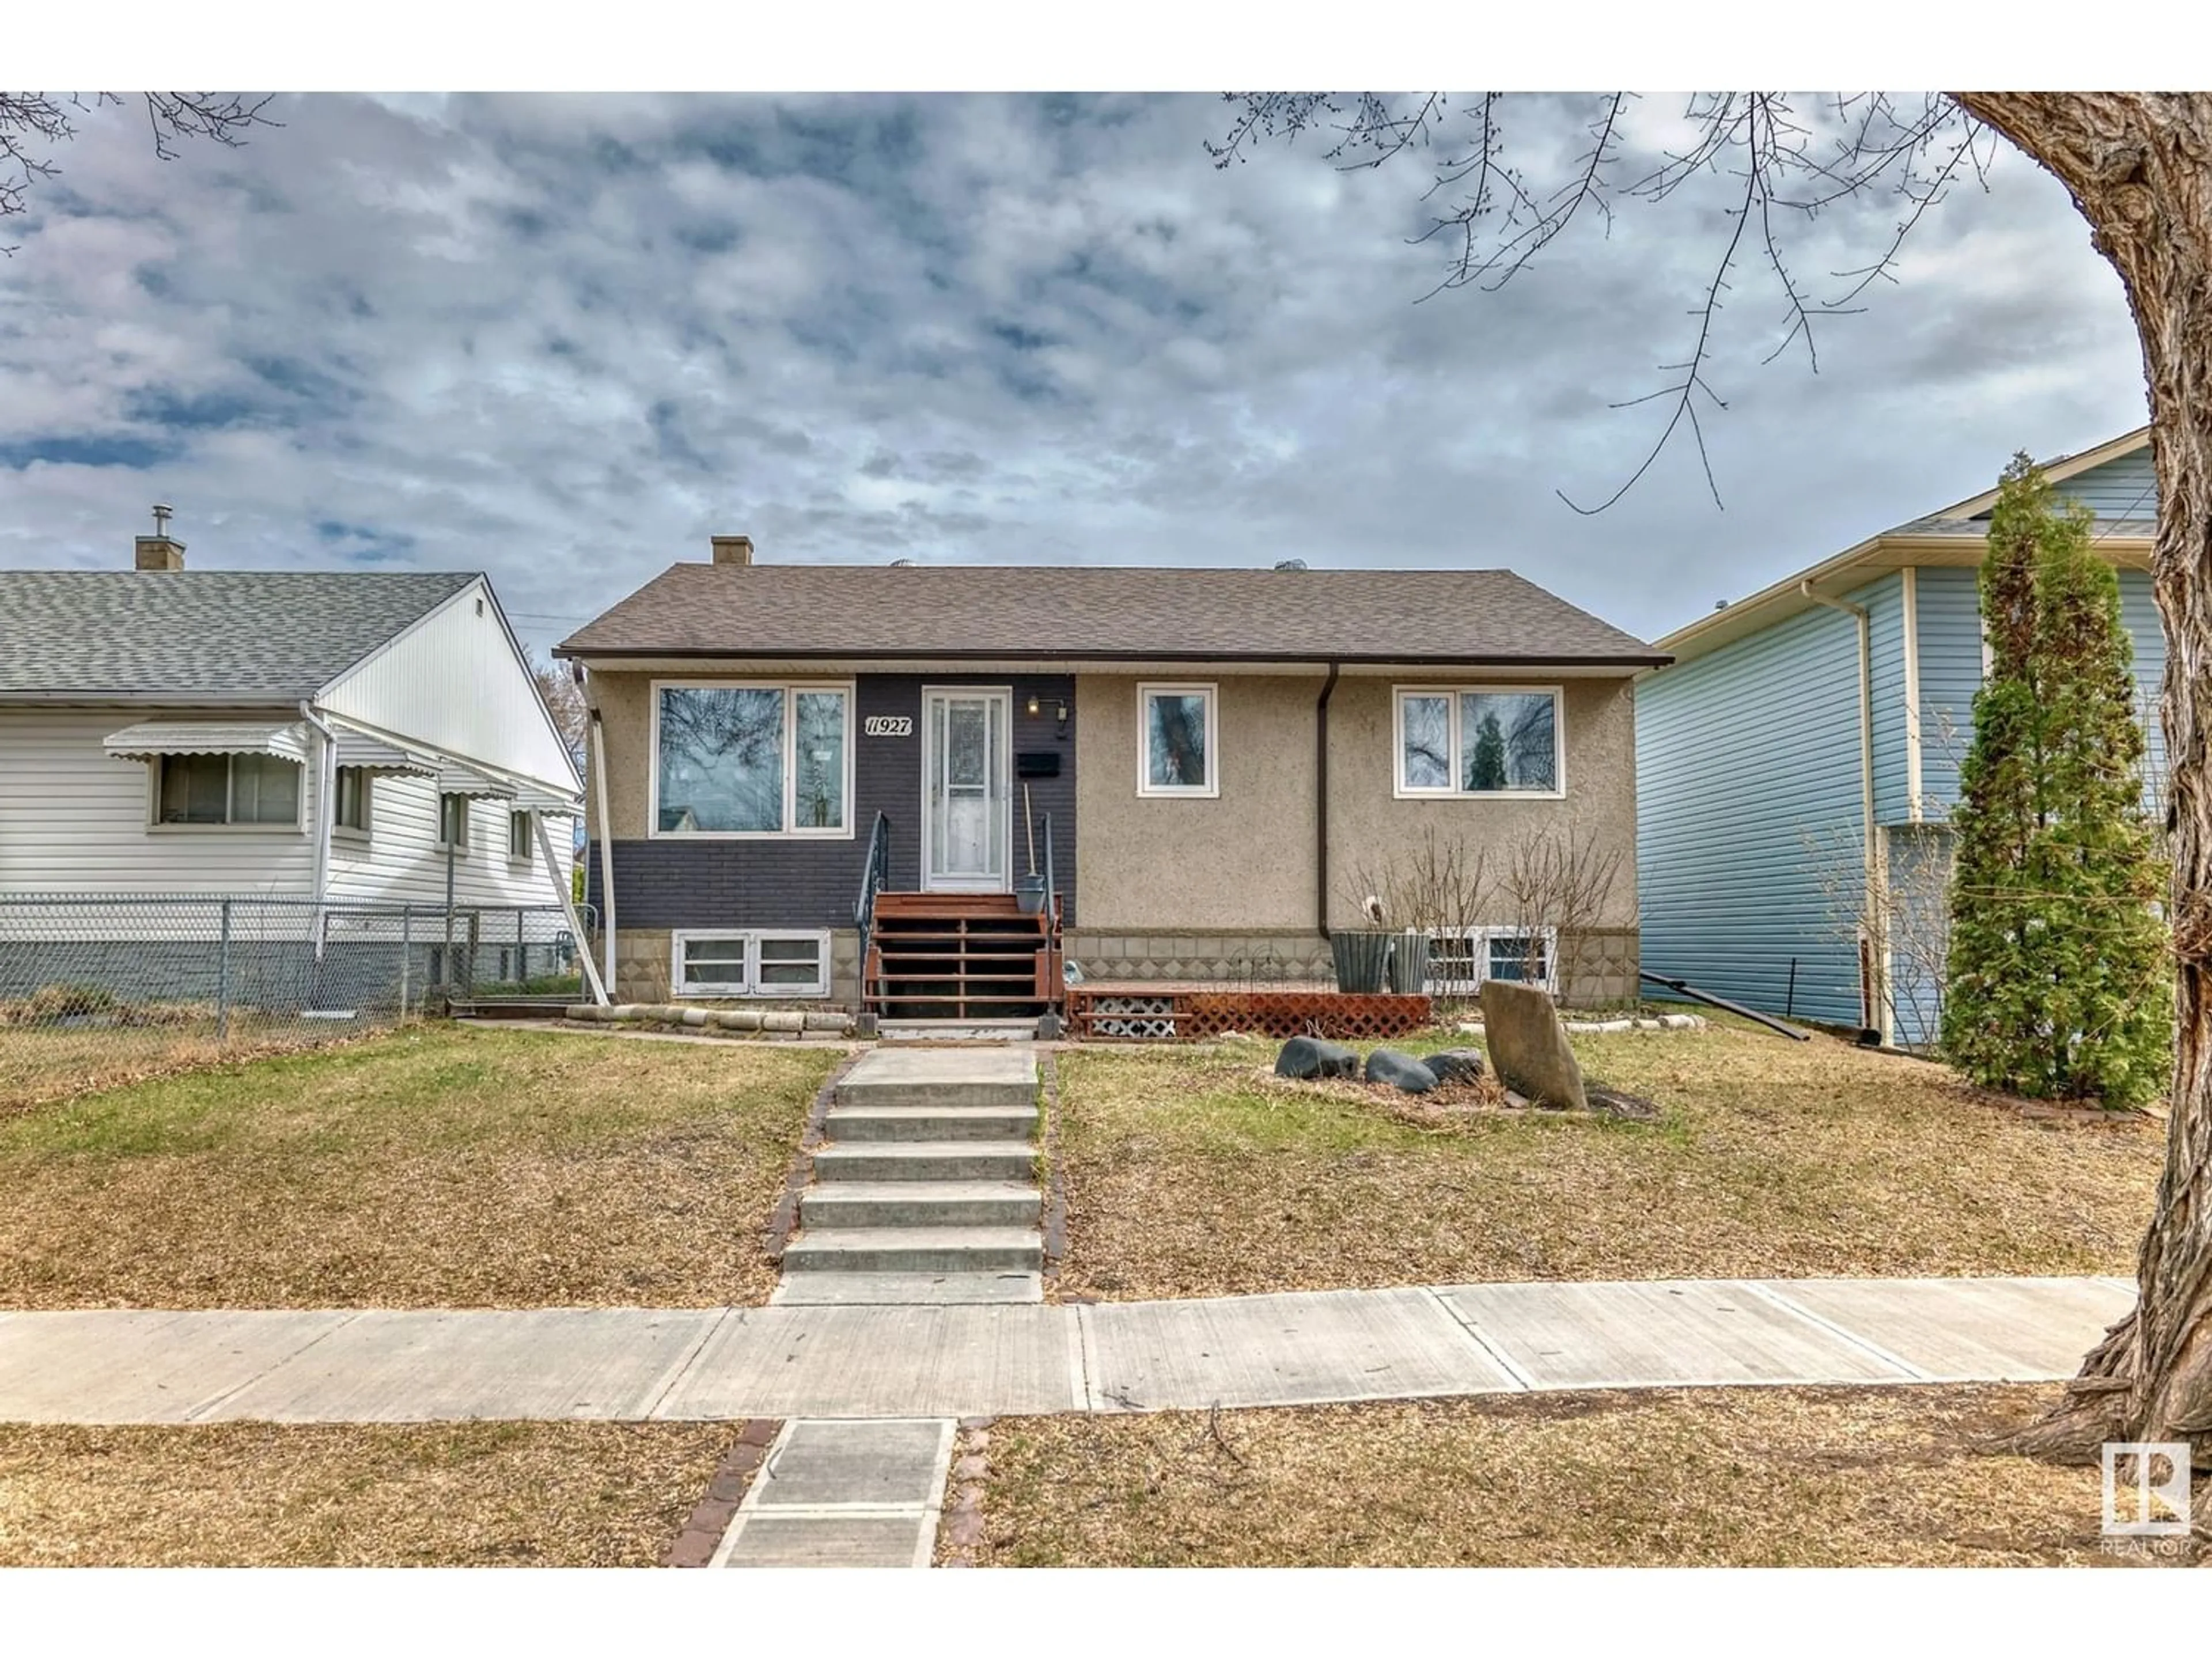 Frontside or backside of a home for 11927 53 ST NW, Edmonton Alberta T5W3L4